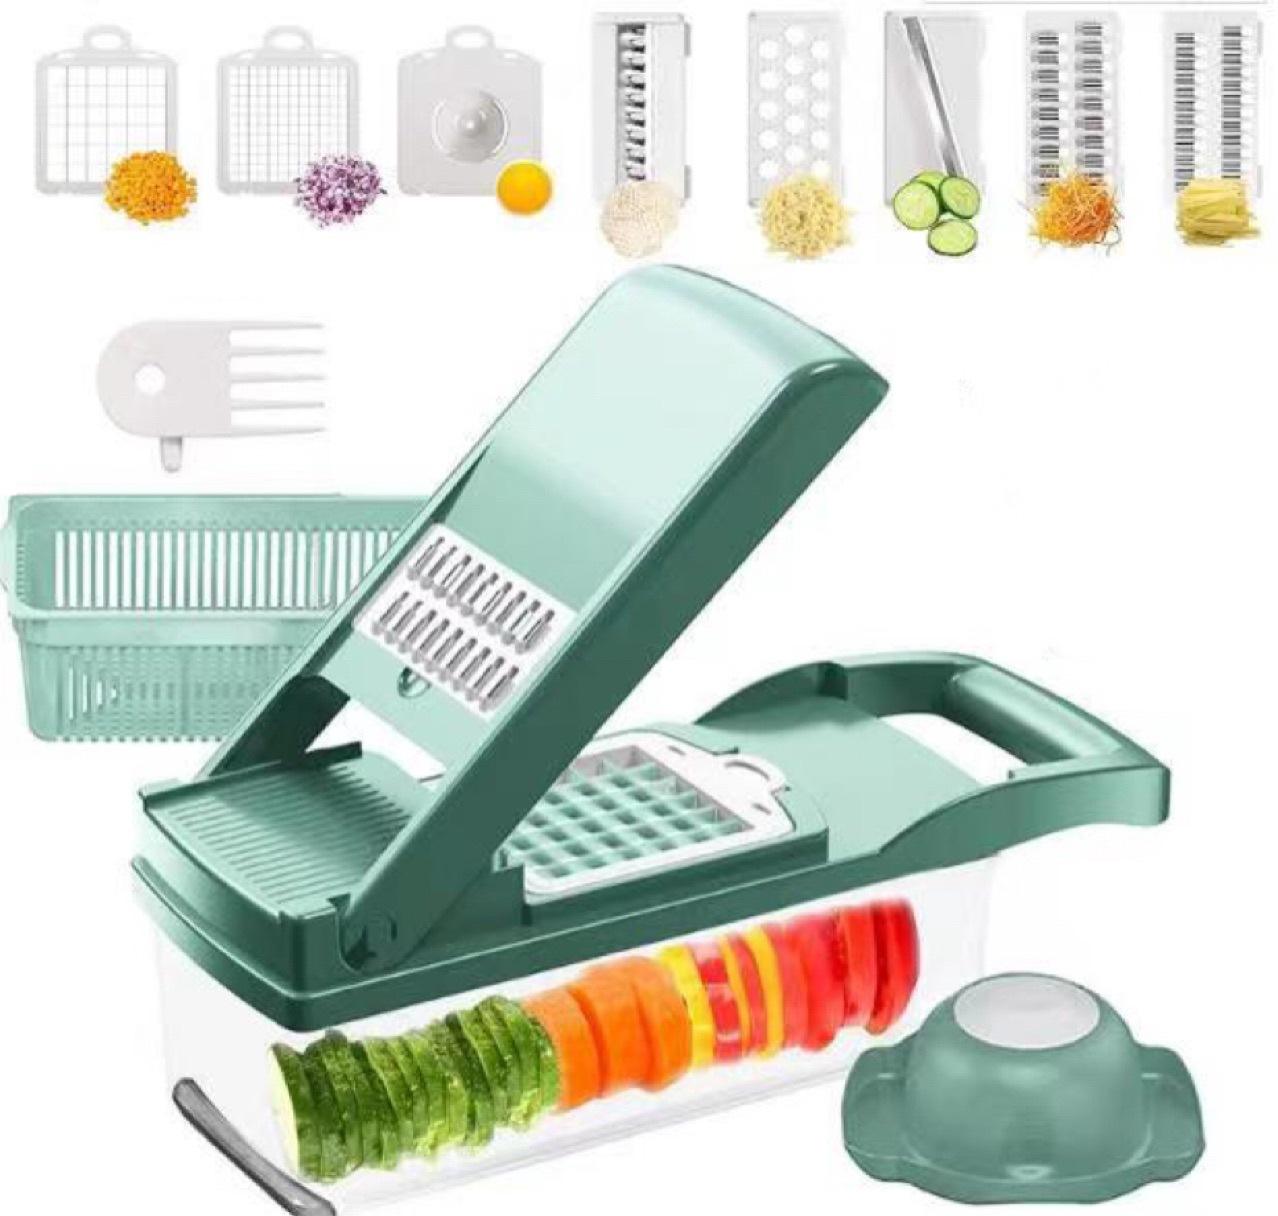 Vegetable Chopper and Cutter 